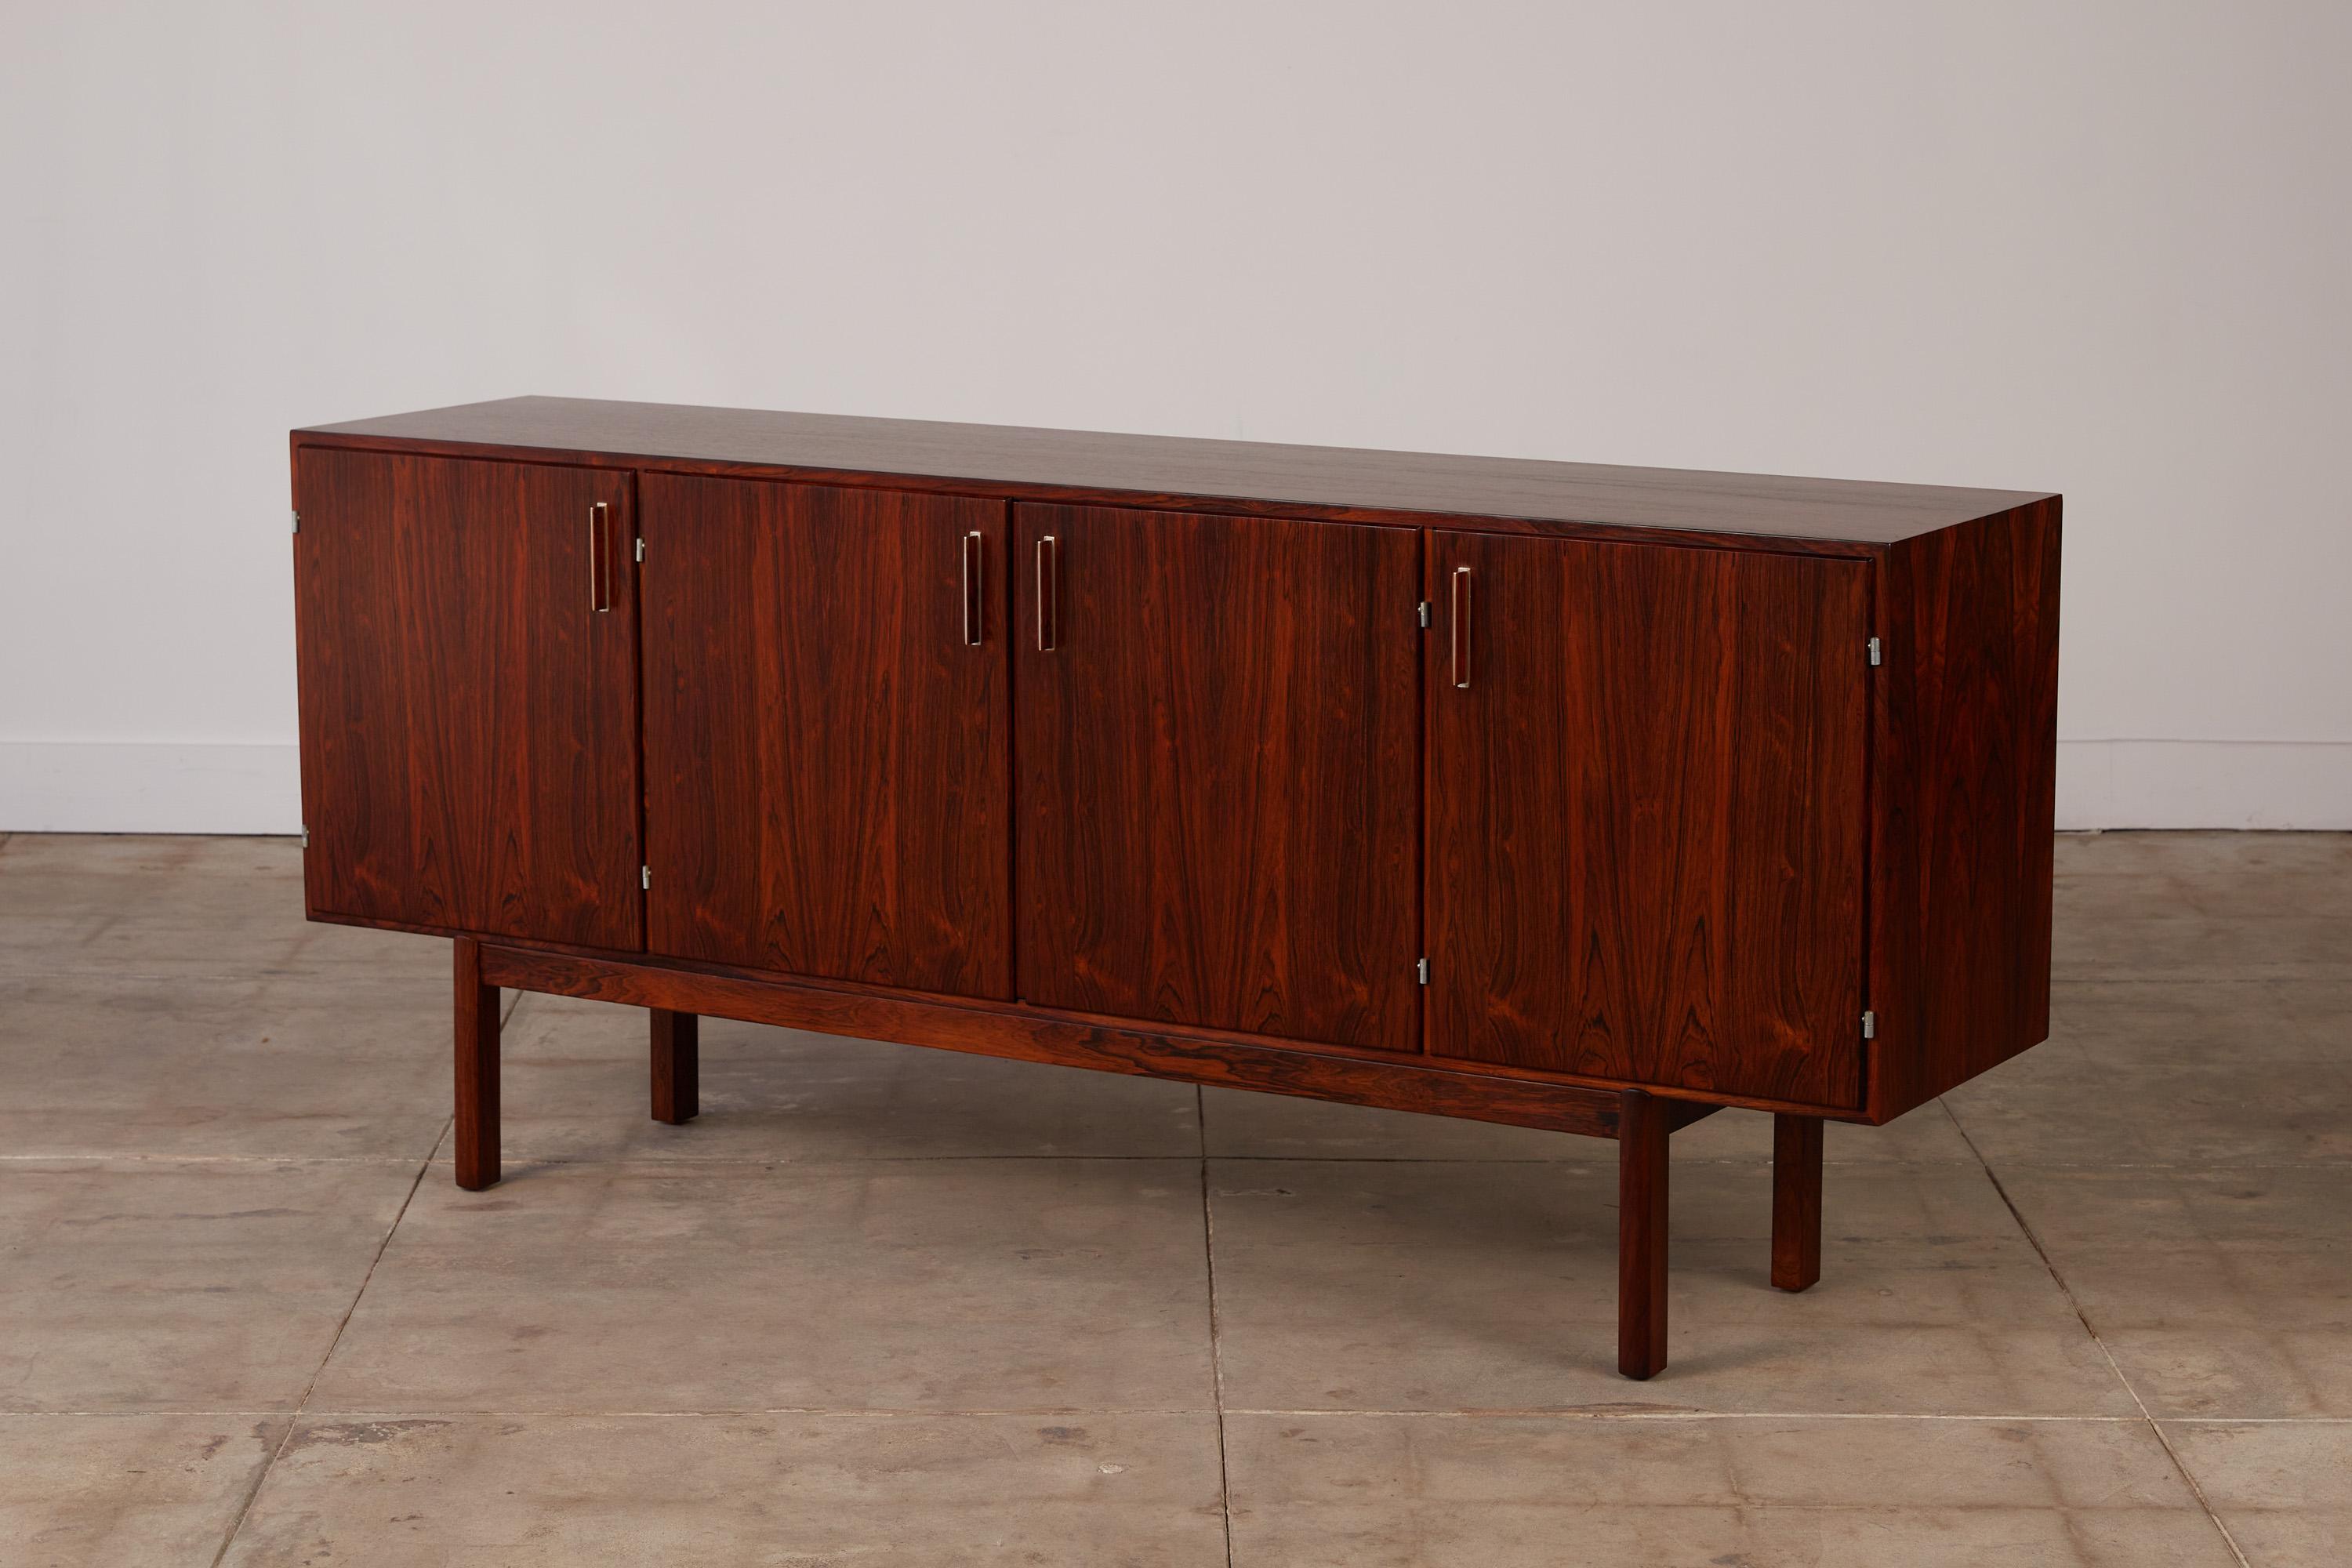 Danish modern rosewood credenza by Axel Christensen for ACO Mobler, Denmark, c.1950s This stunning rosewood credenza is equipped with three sections for storage - two of which have adjustable interior shelves and one features multiple drawers. It